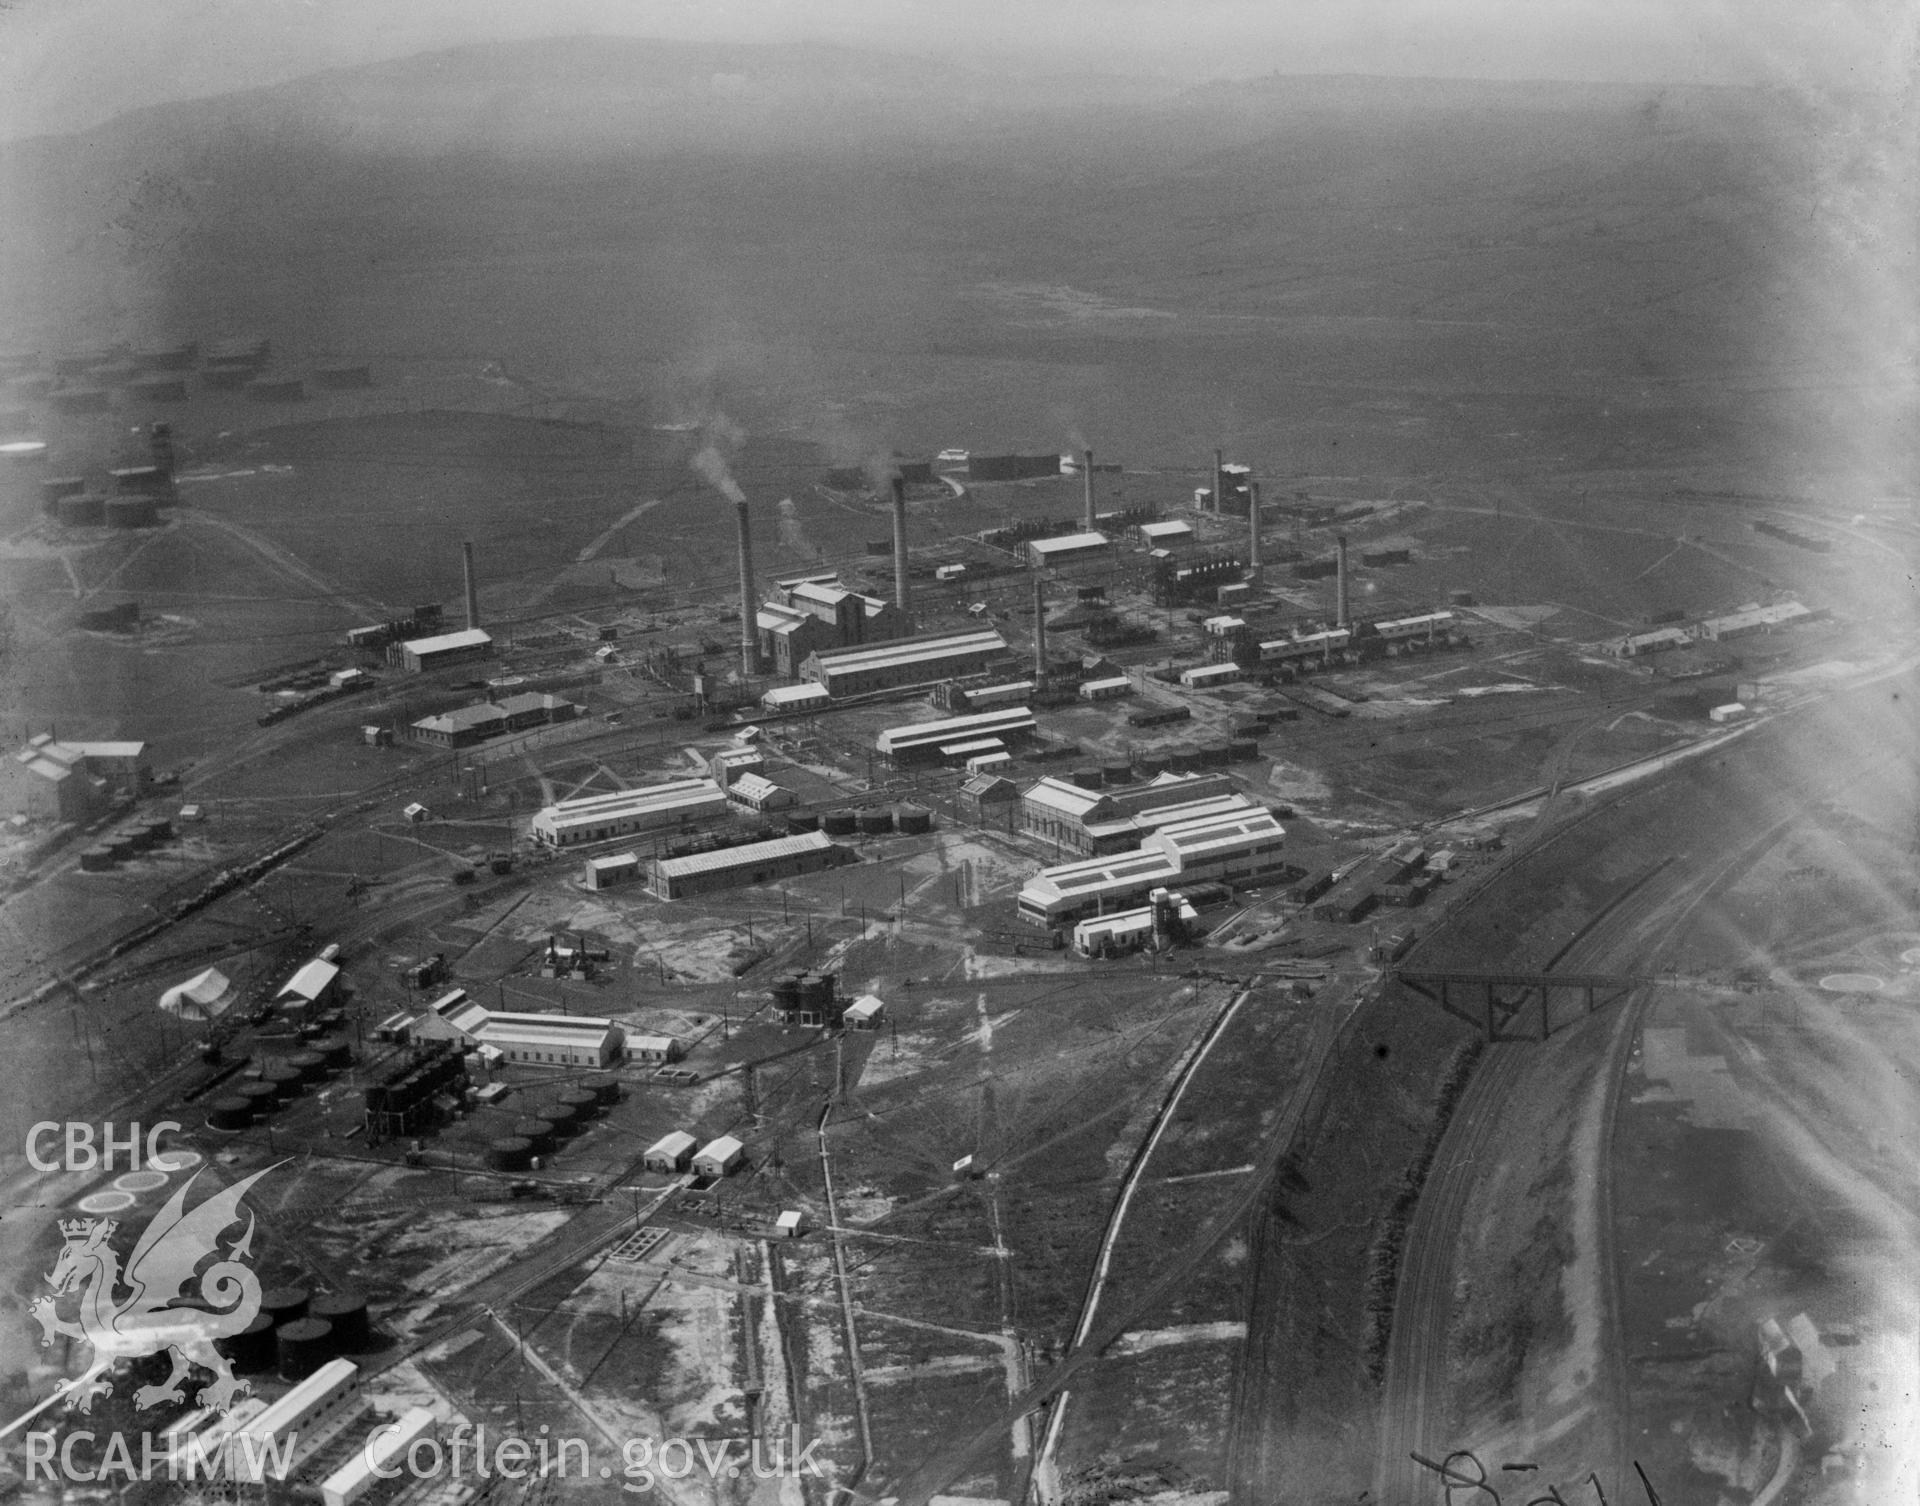 General view of the Anglo Iranian oil refinery, Llandarcy. Oblique aerial photograph, 5?x4? BW glass plate.